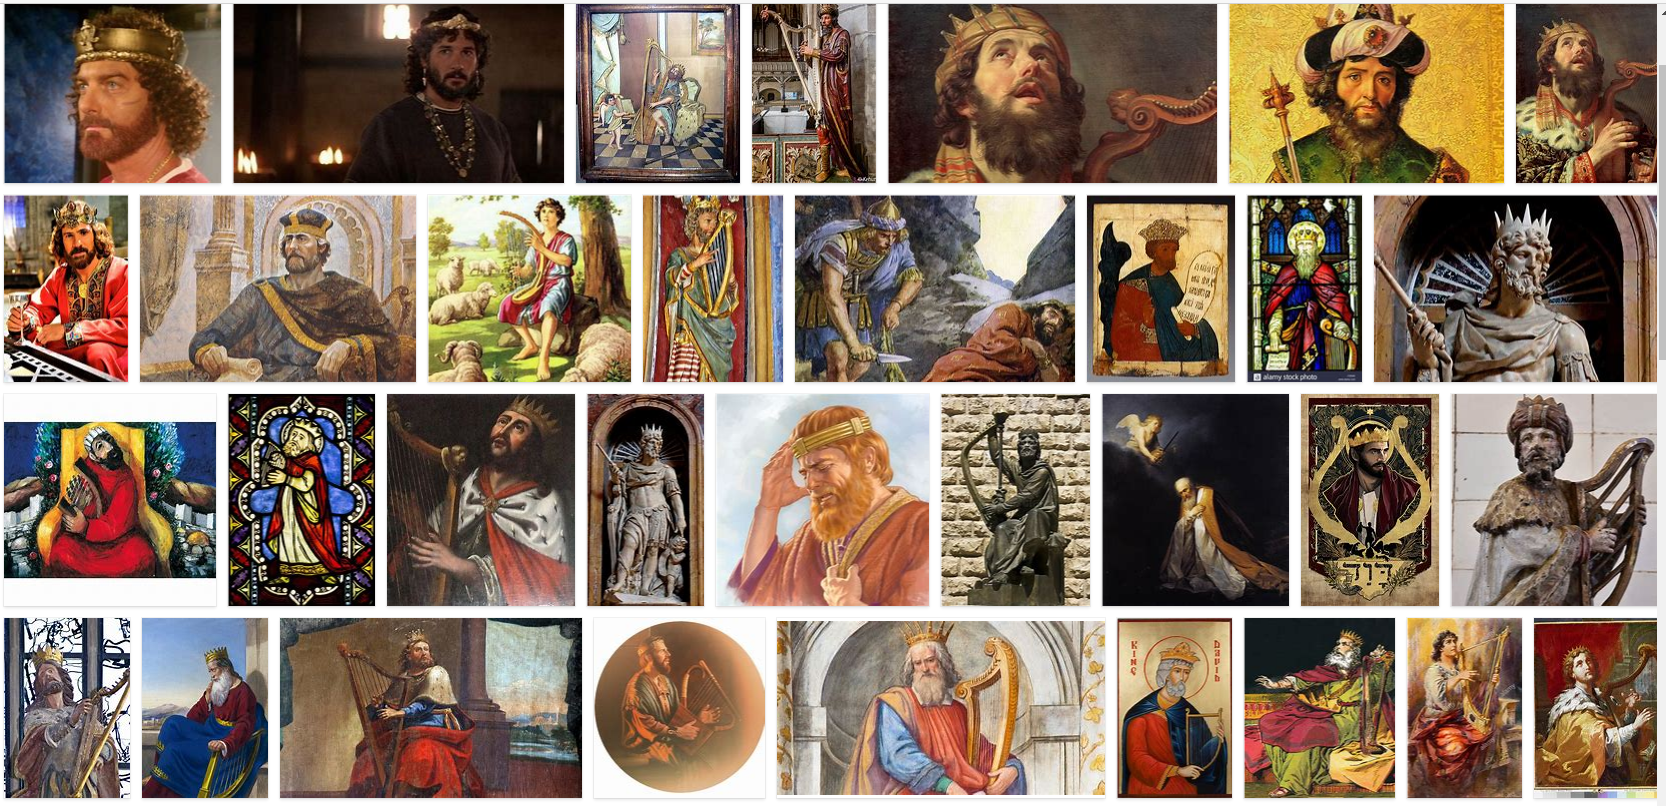 The many faces of King David